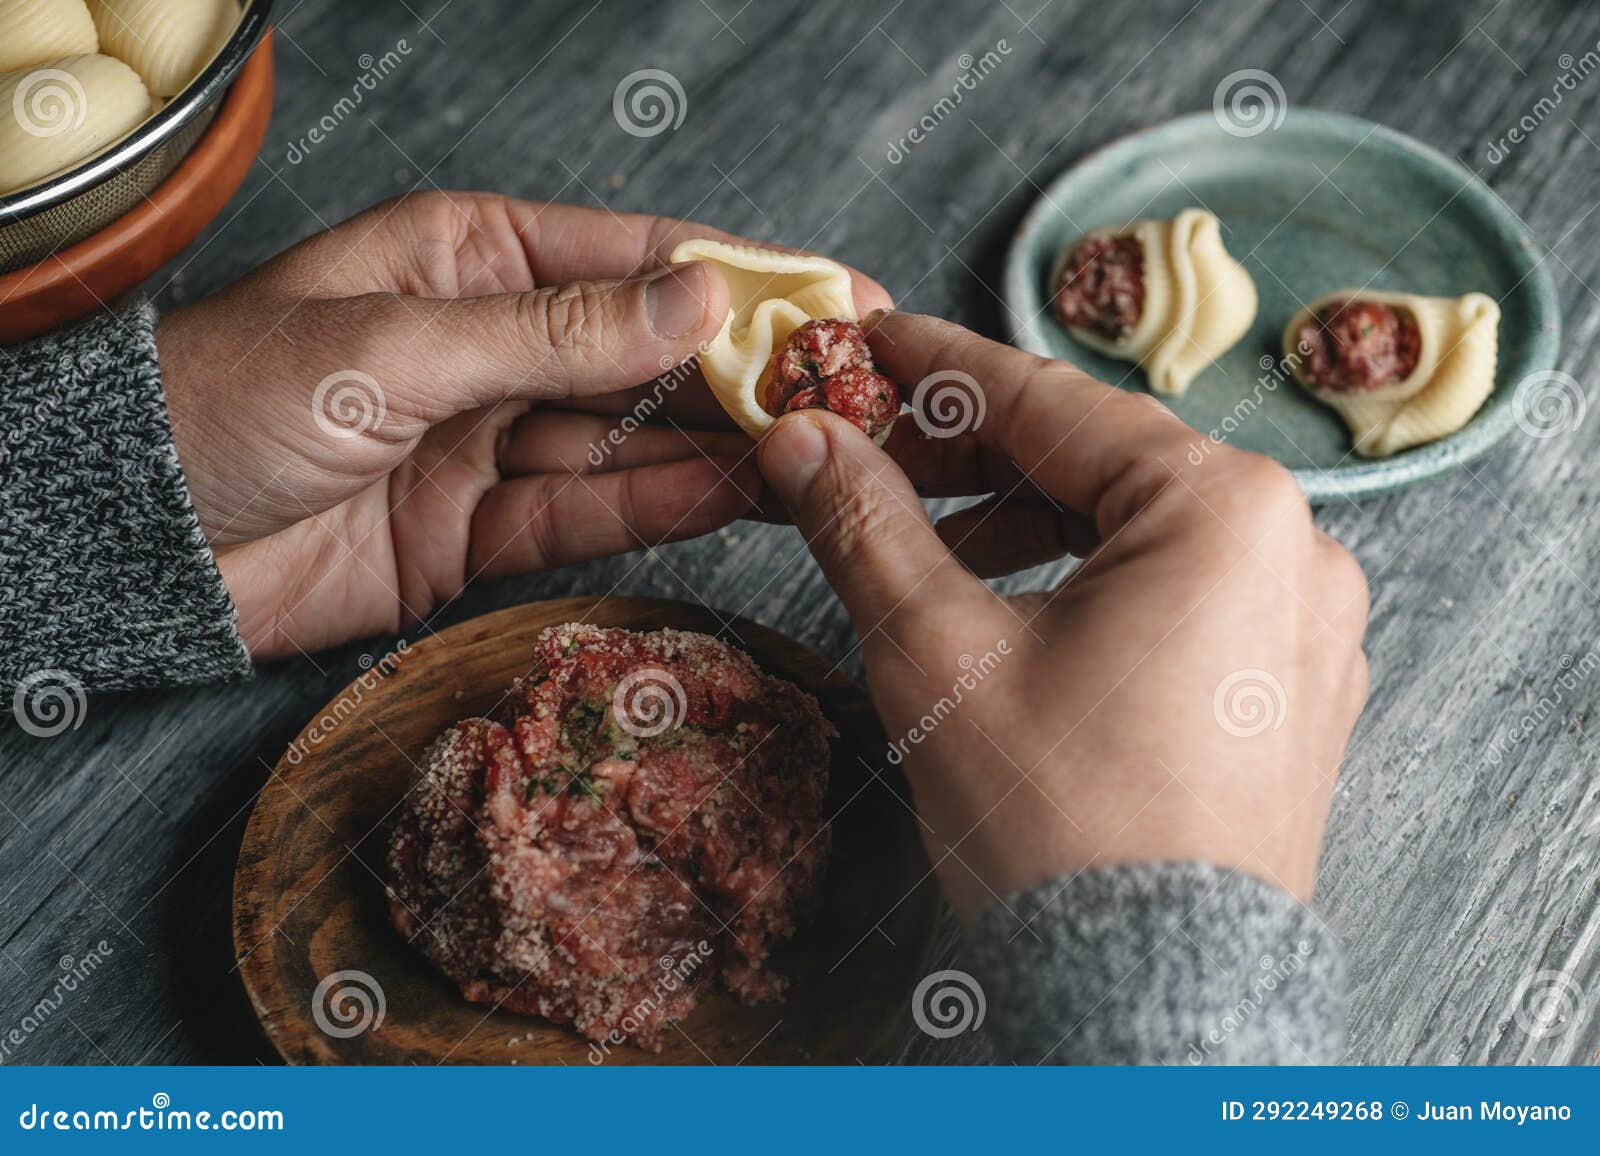 man is filling a catalan galet with ground meat